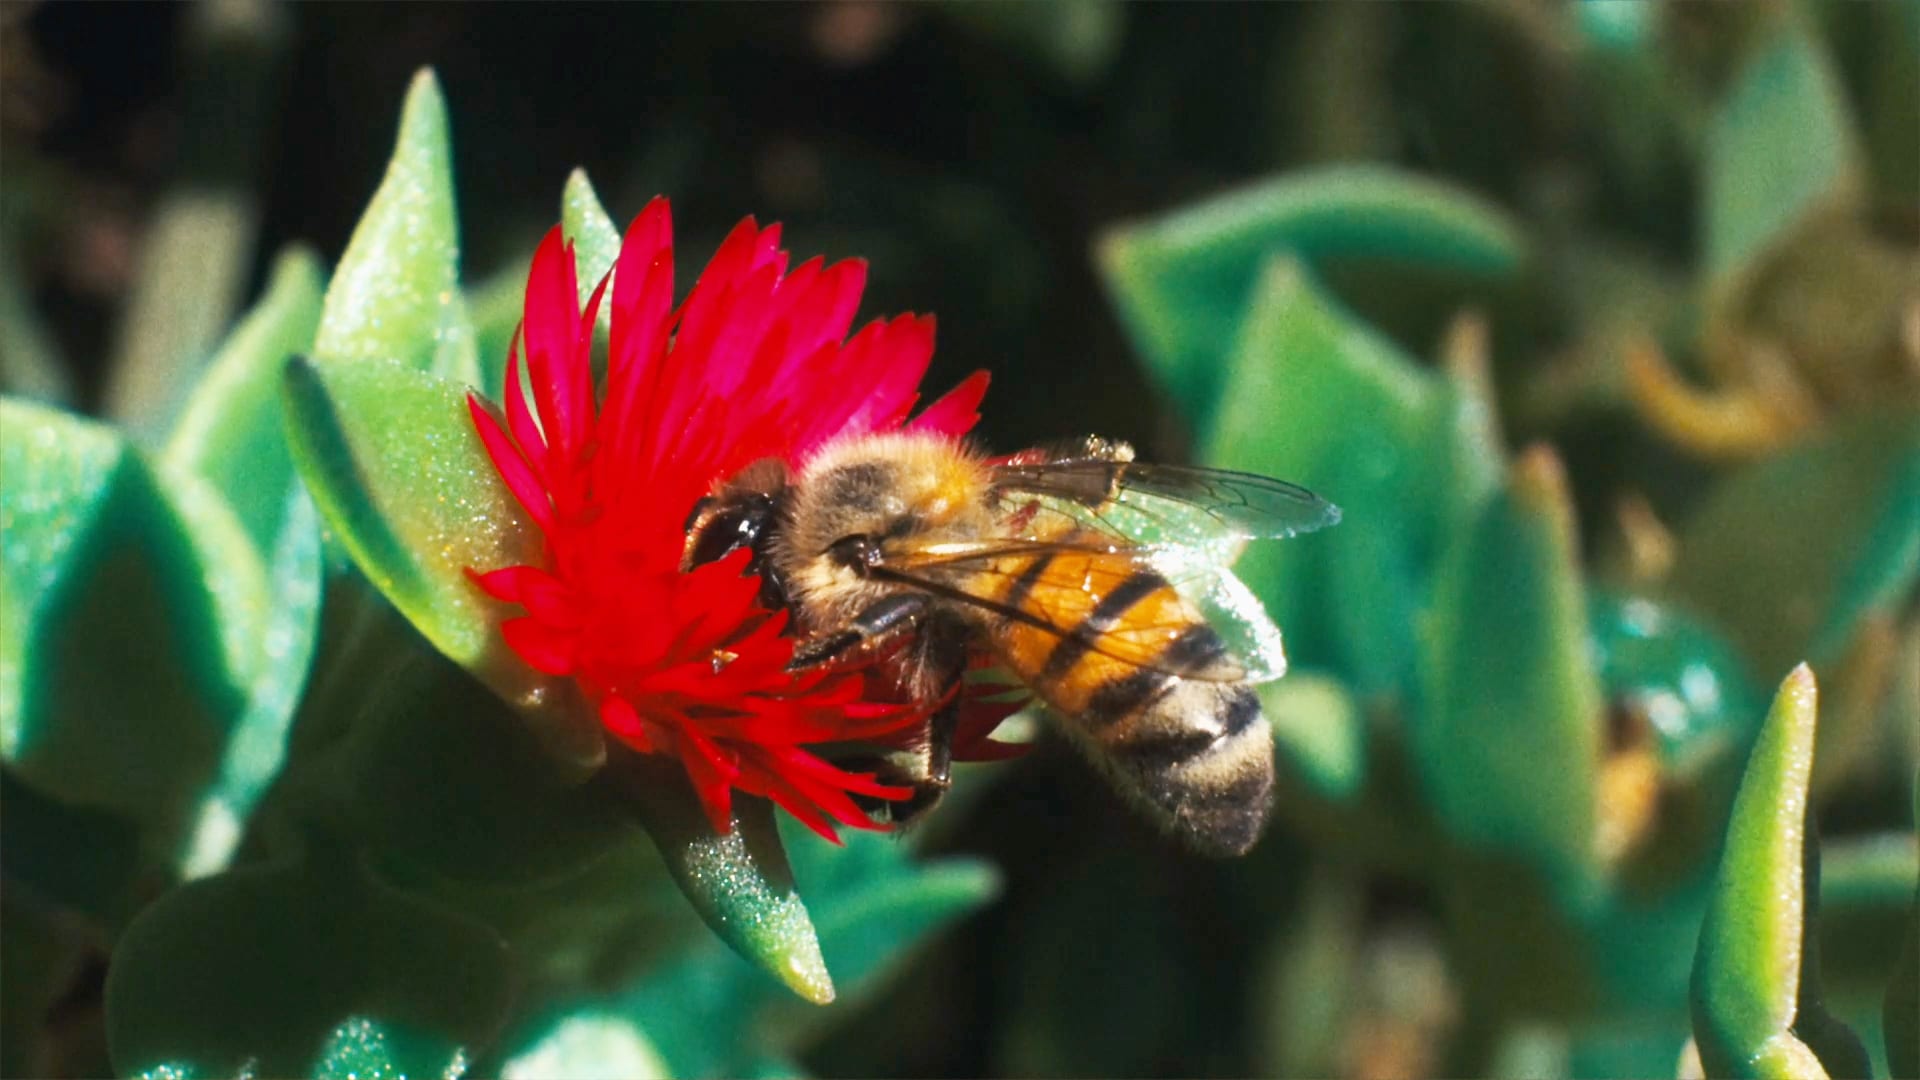 How your porn addiction can help save the bees